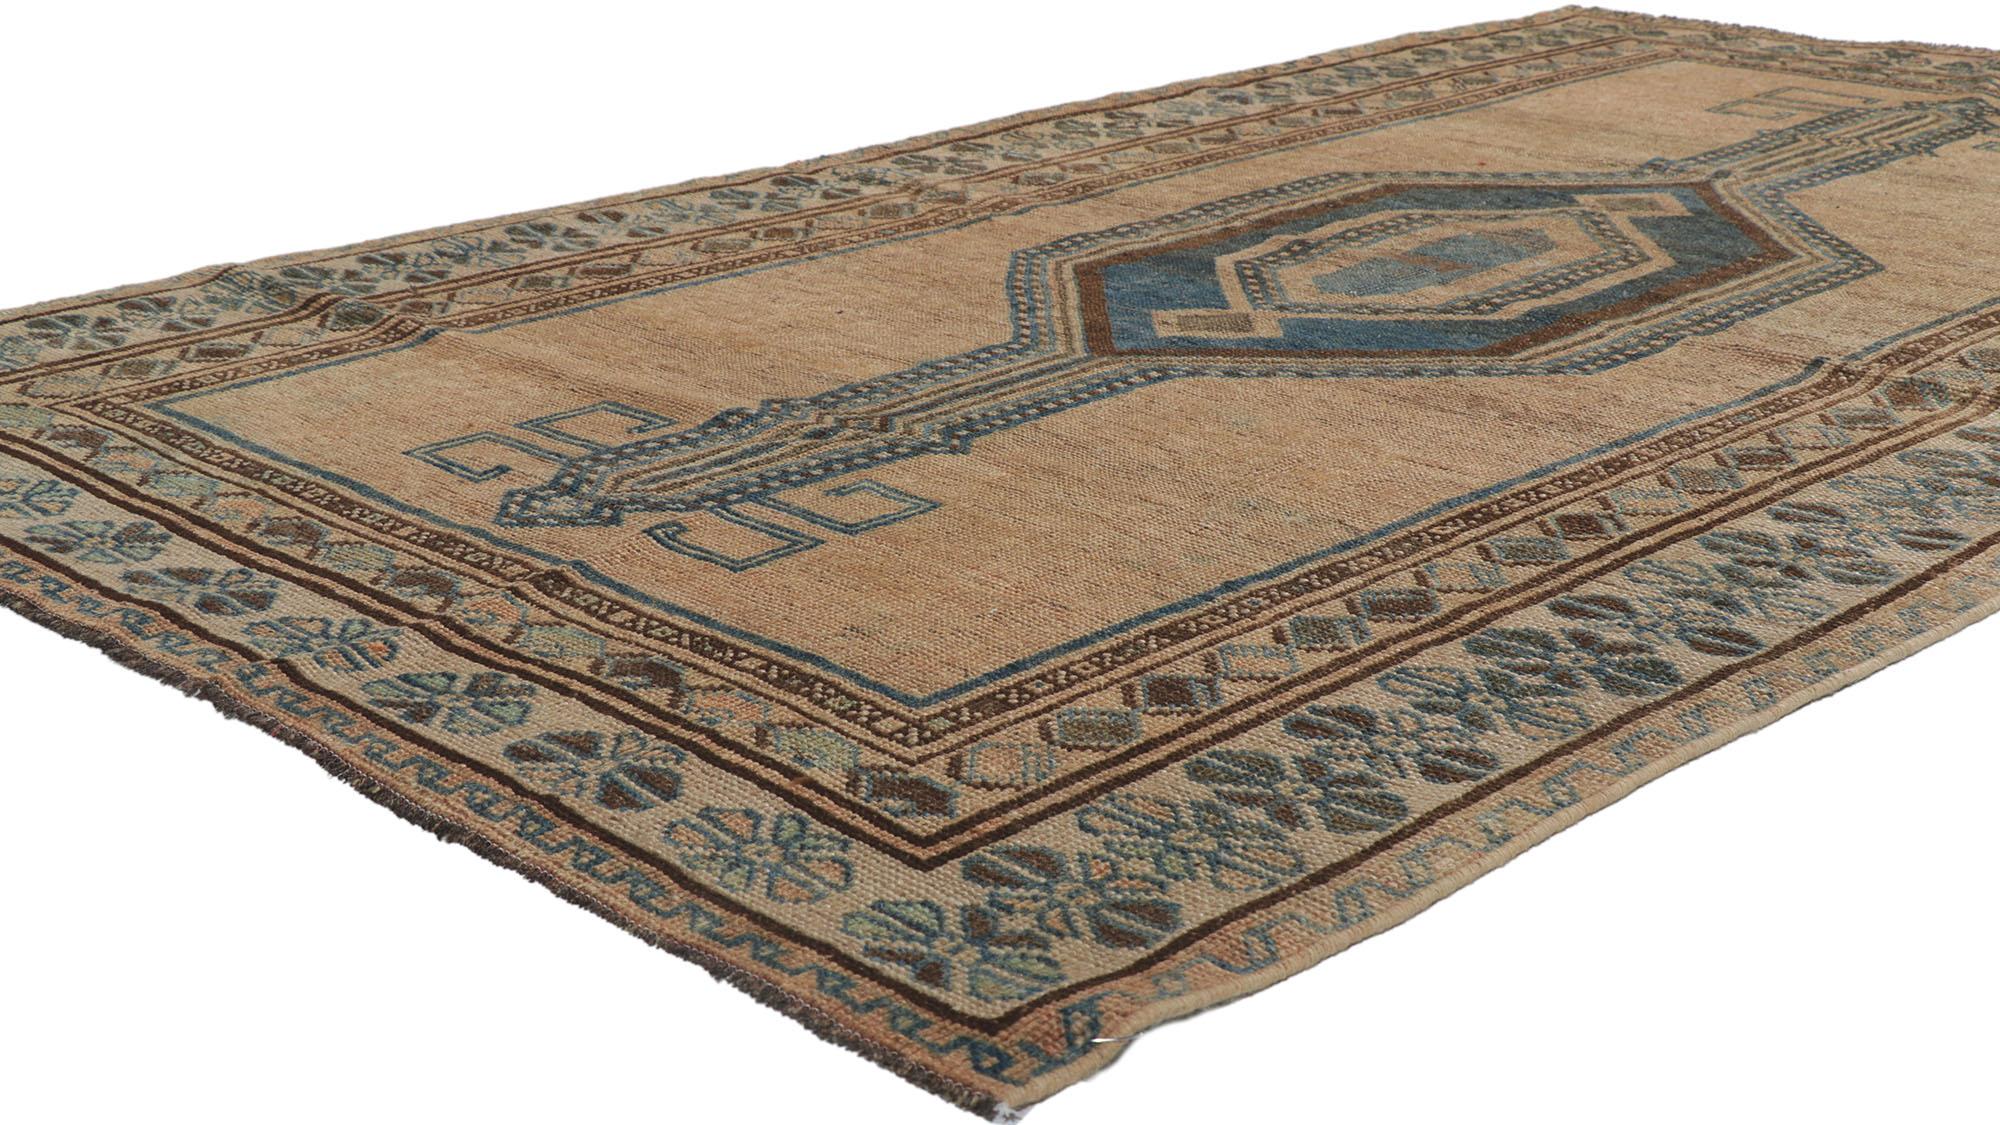 60988 blue and brown antique northwest Persian rug runner 04'11 x 08'06. Warm and inviting, this hand knotted wool antique Northwest Persian rug runner features a distinctive pole medallion design in an open abrashed brown field. Imbued with blue